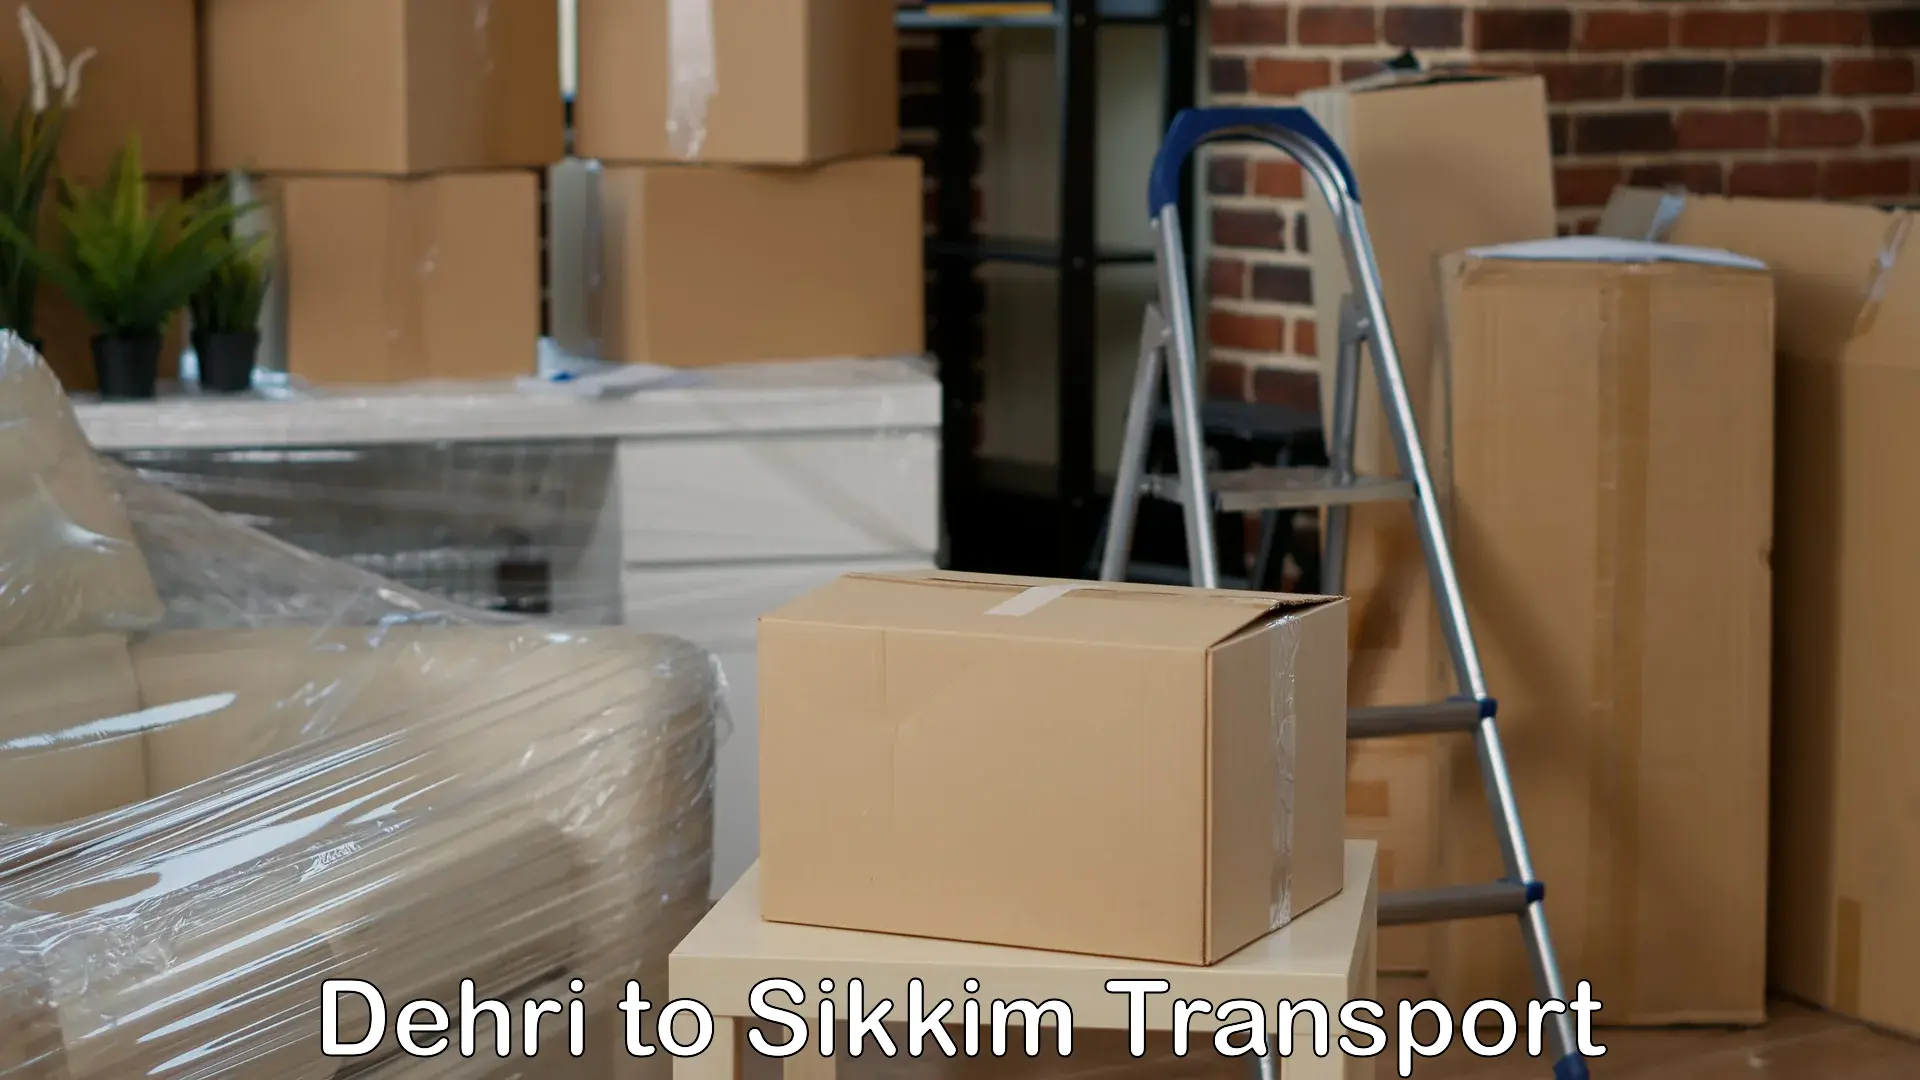 Daily parcel service transport in Dehri to Sikkim